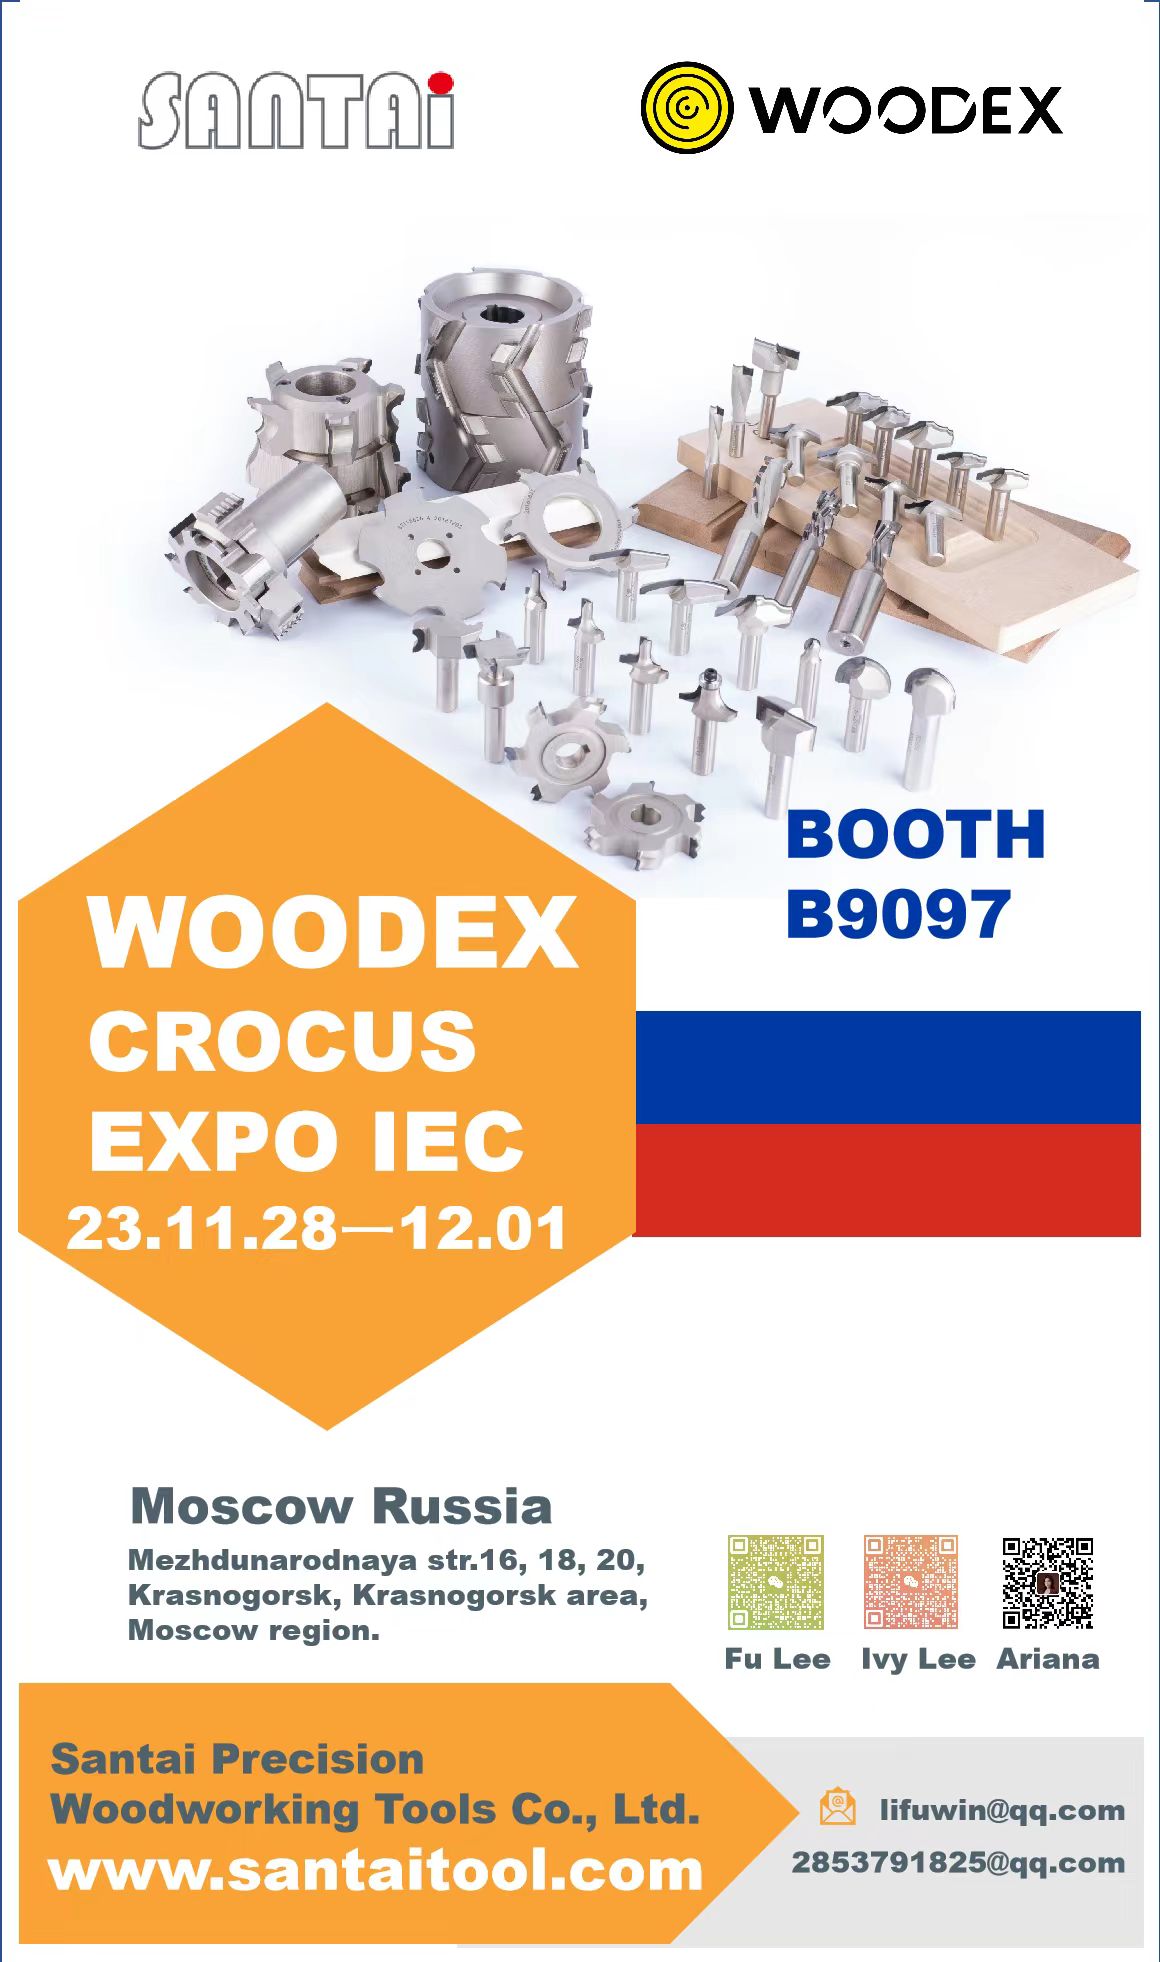 We are delighted to announce the participation of Santai Precision Tools Co., Ltd in the upcoming exhibition in Moscow, Russia, scheduled from November 28th to December 1st 2023.